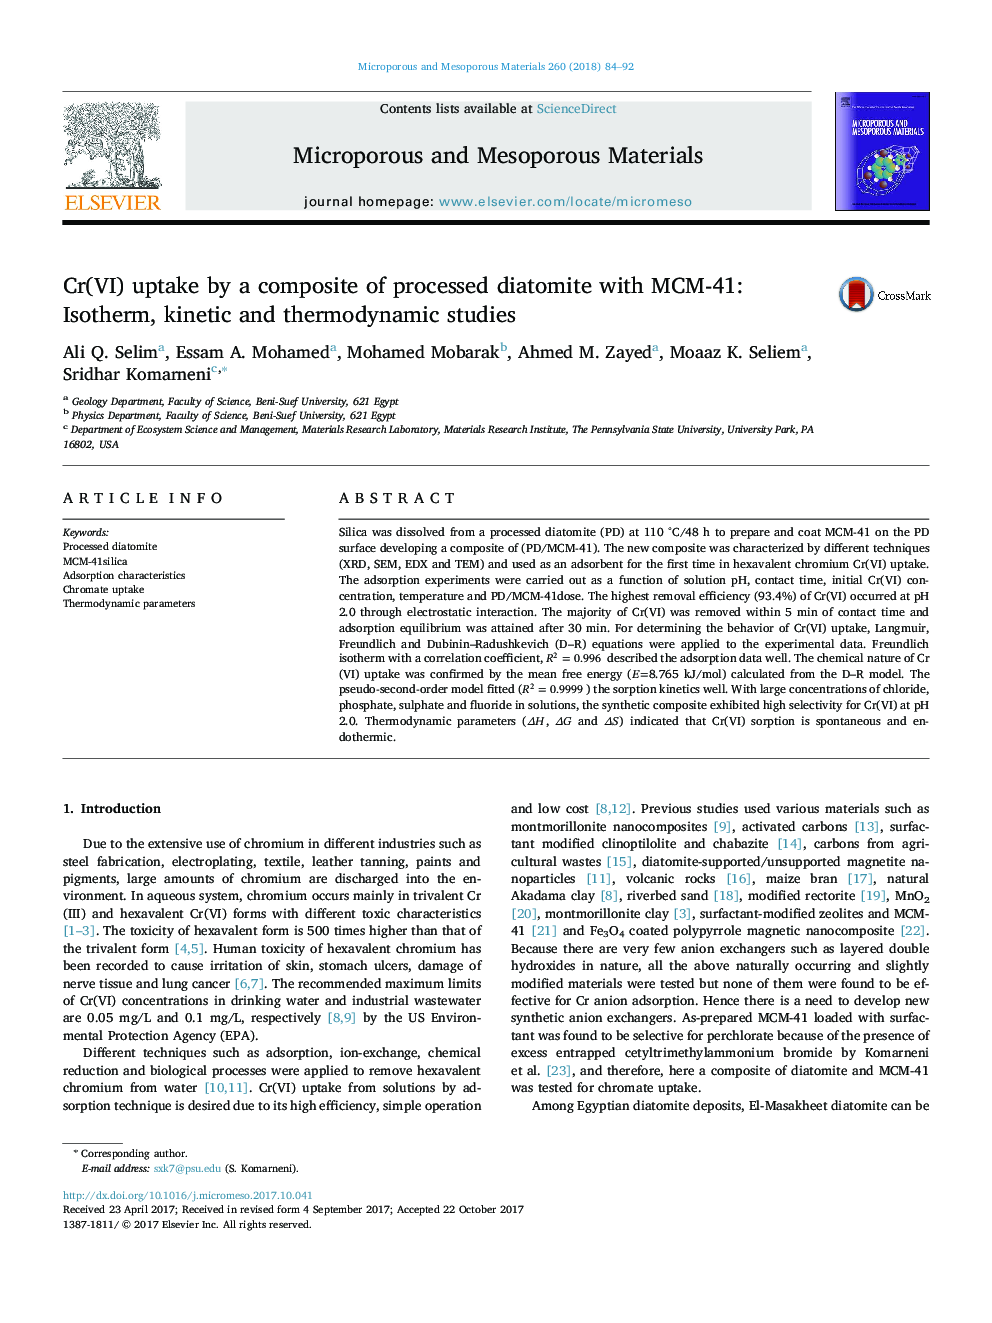 Cr(VI) uptake by a composite of processed diatomite with MCM-41: Isotherm, kinetic and thermodynamic studies